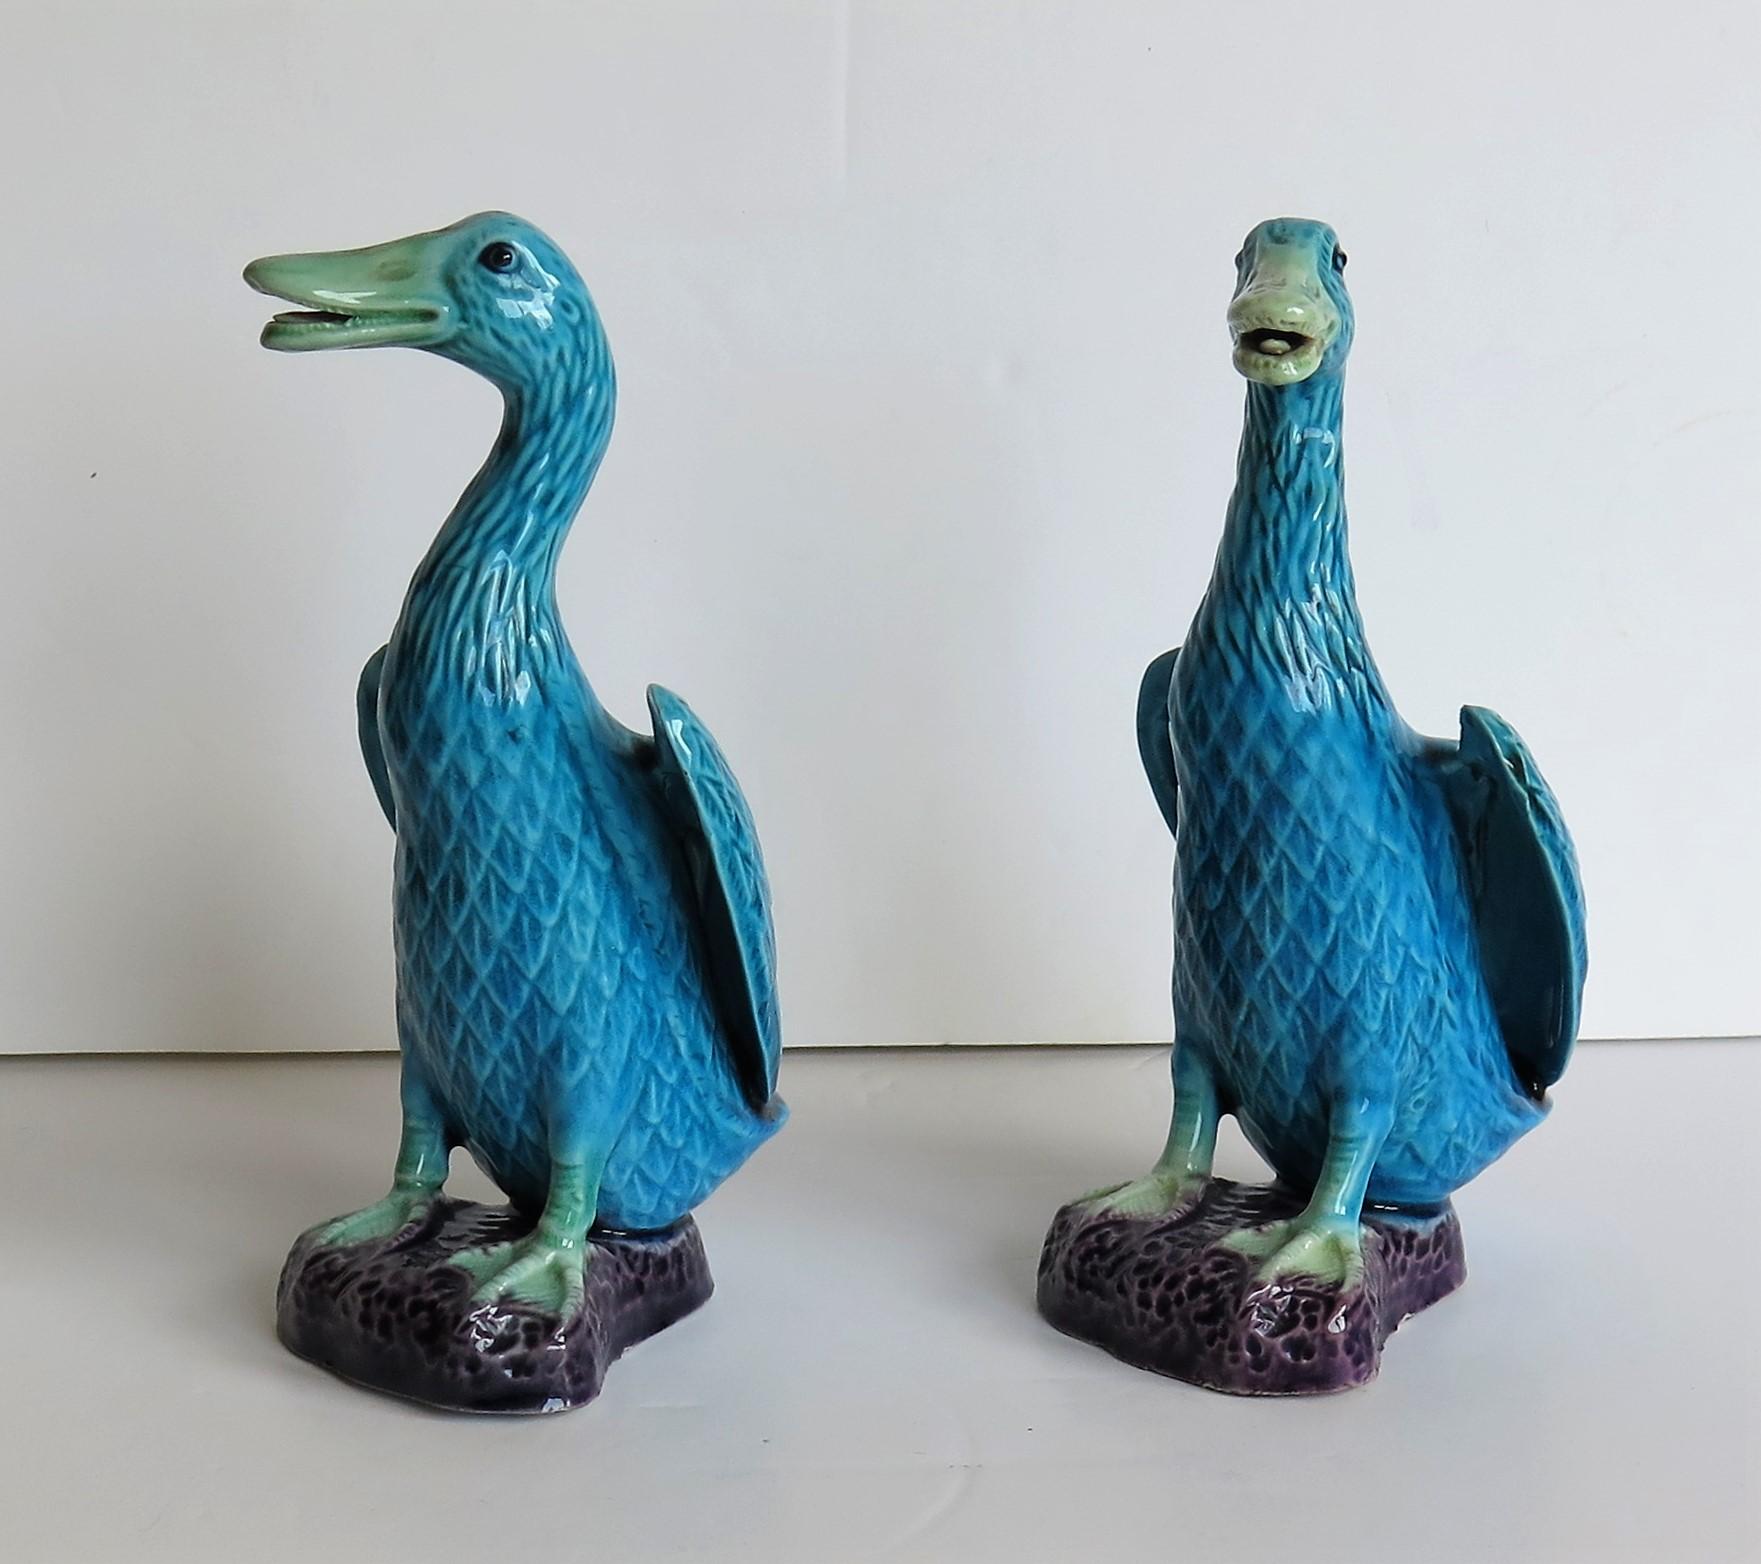 20th Century Two Chinese Export Porcelain Geese or Goose Bird Figurines in Poychrome Enamels